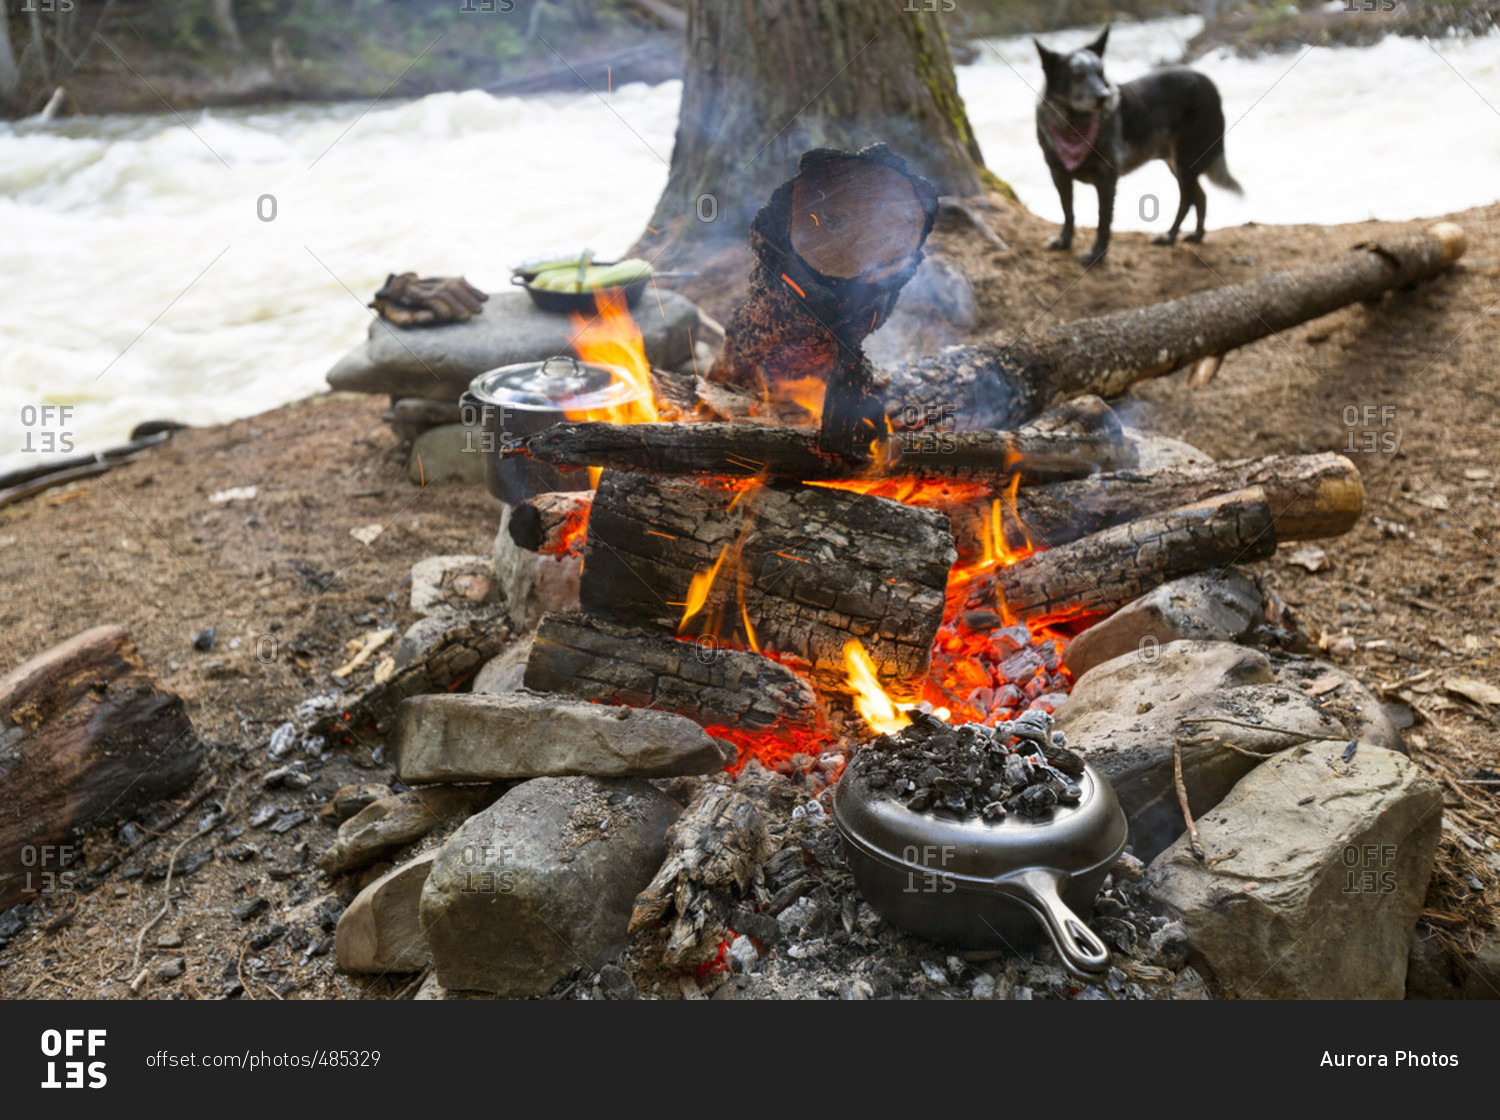 Food Is Prepared In Cast Iron Cooking Vessels Over A Hot Campfire